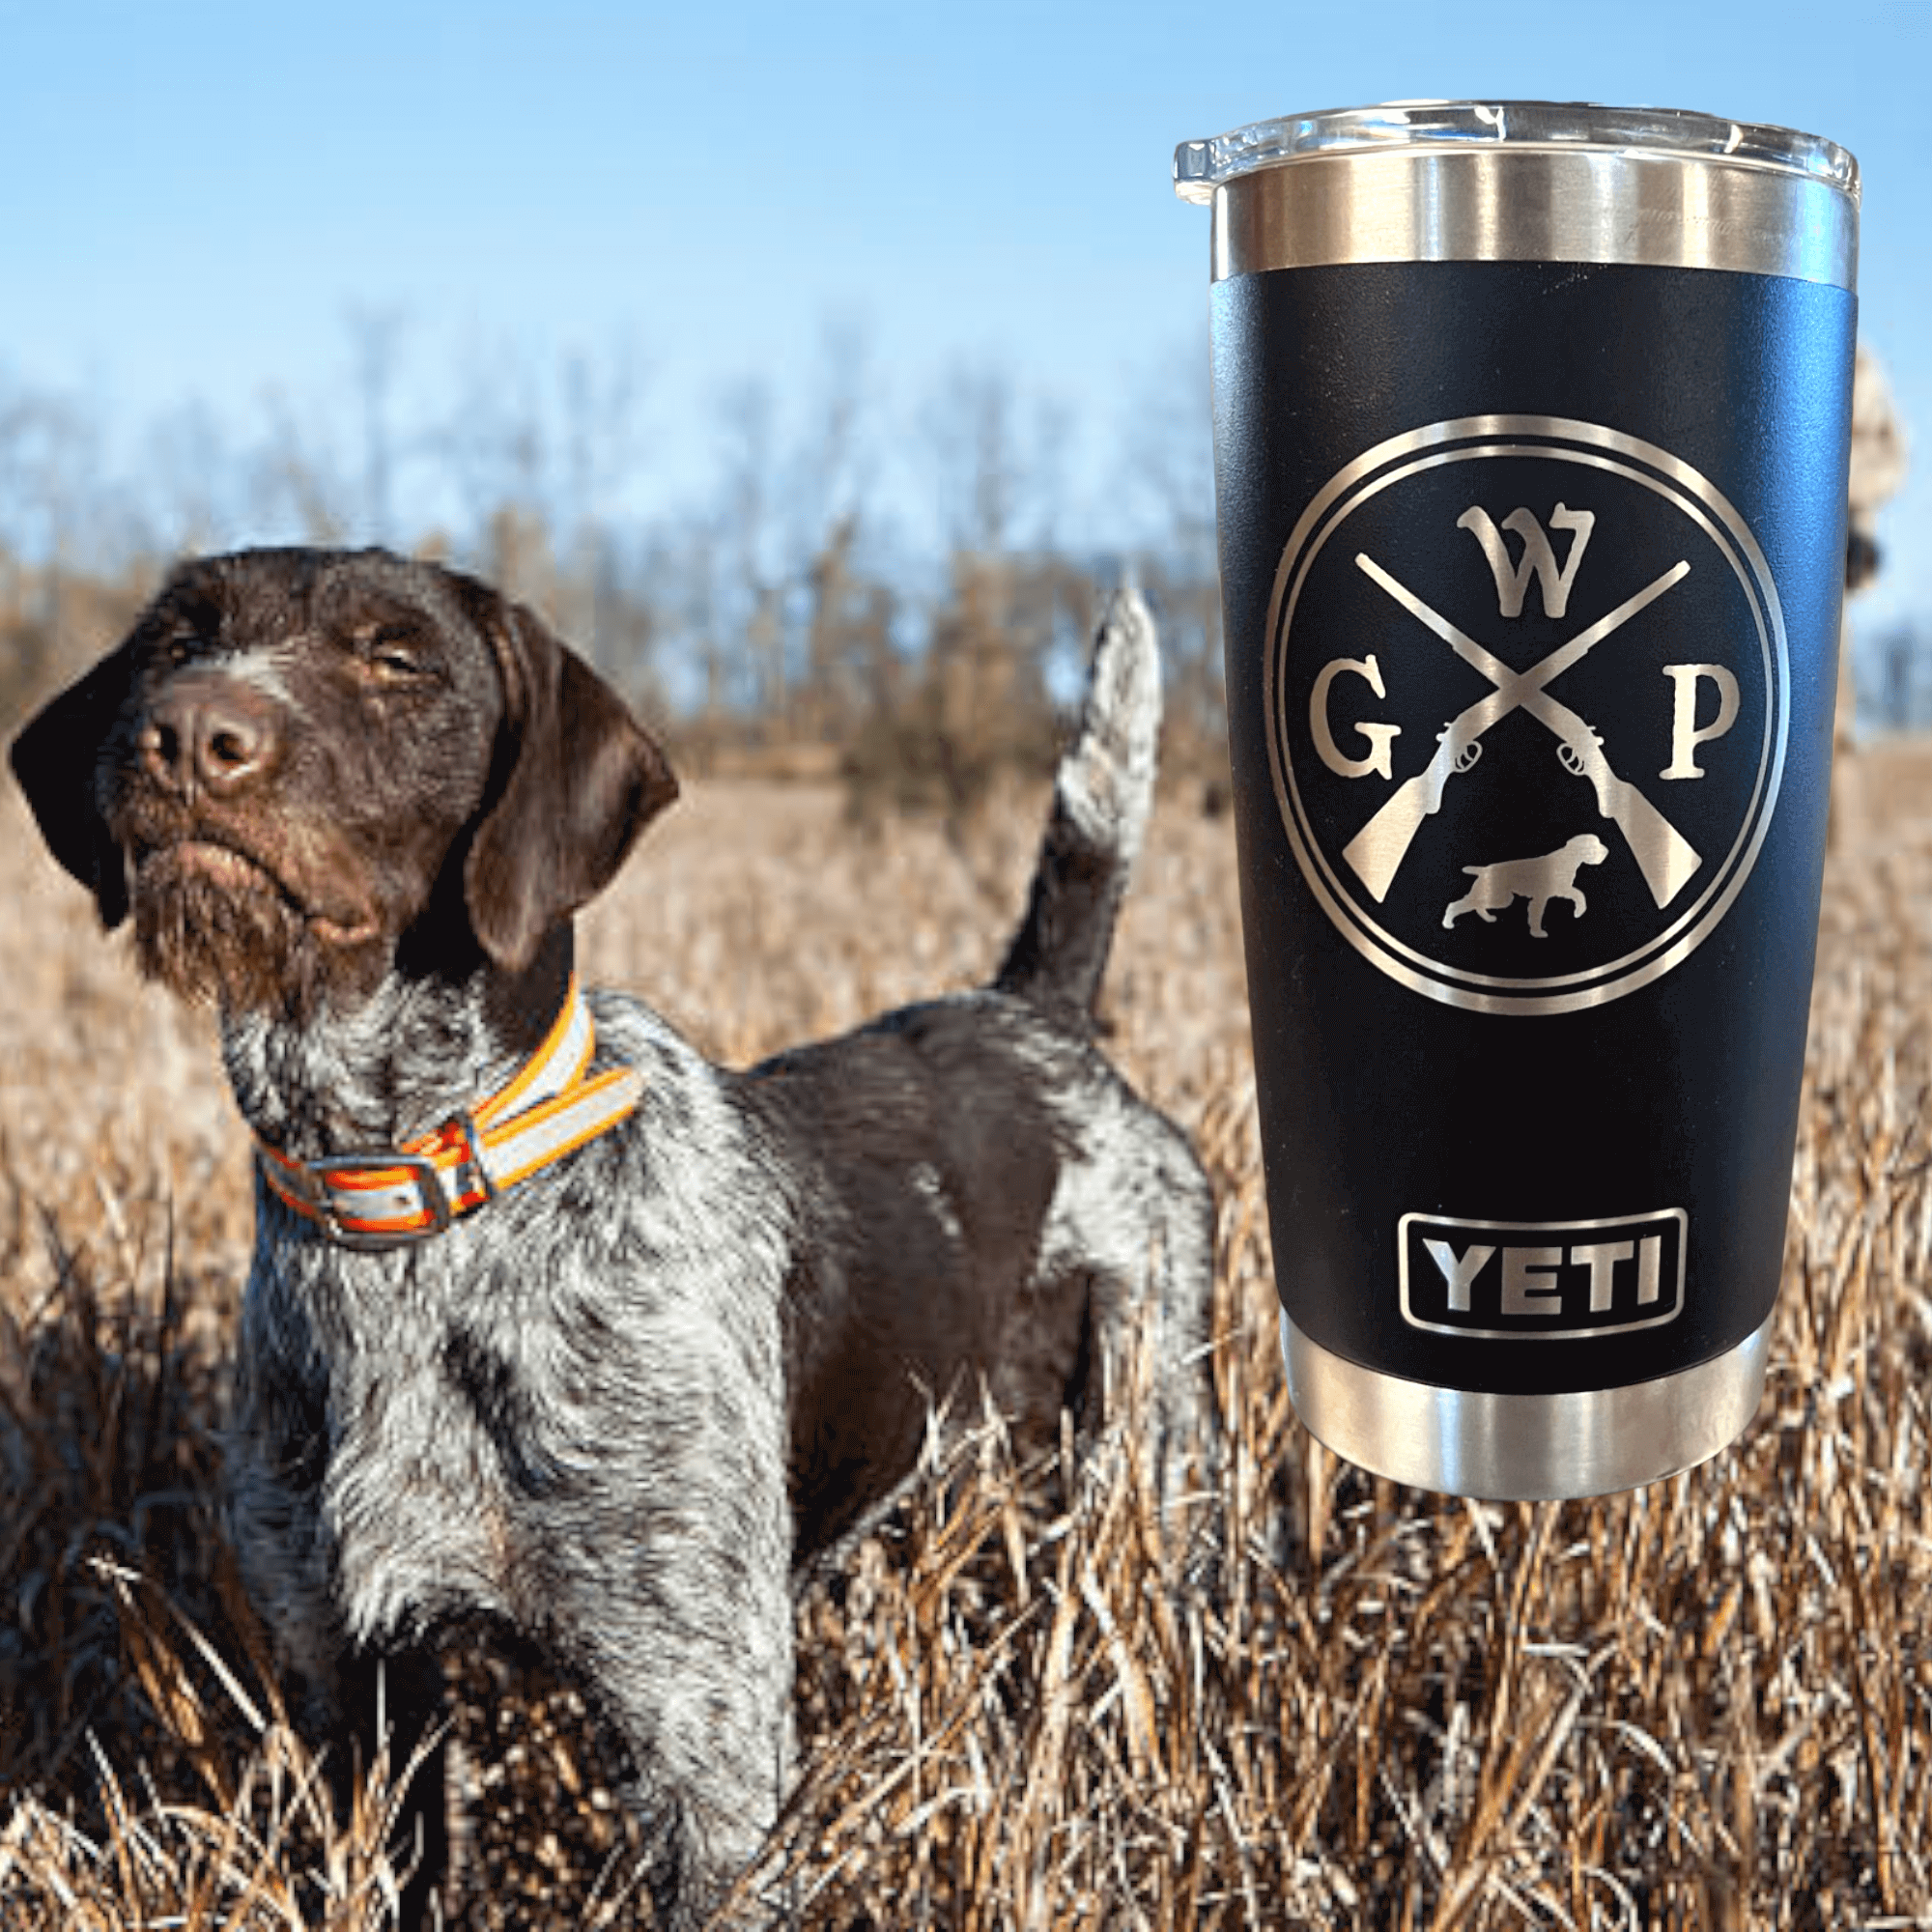 German wirehaired pointer (GWP) laser engraved artwork- silver on black Yeti Rambler tumbler with dog in Wyoming landscape